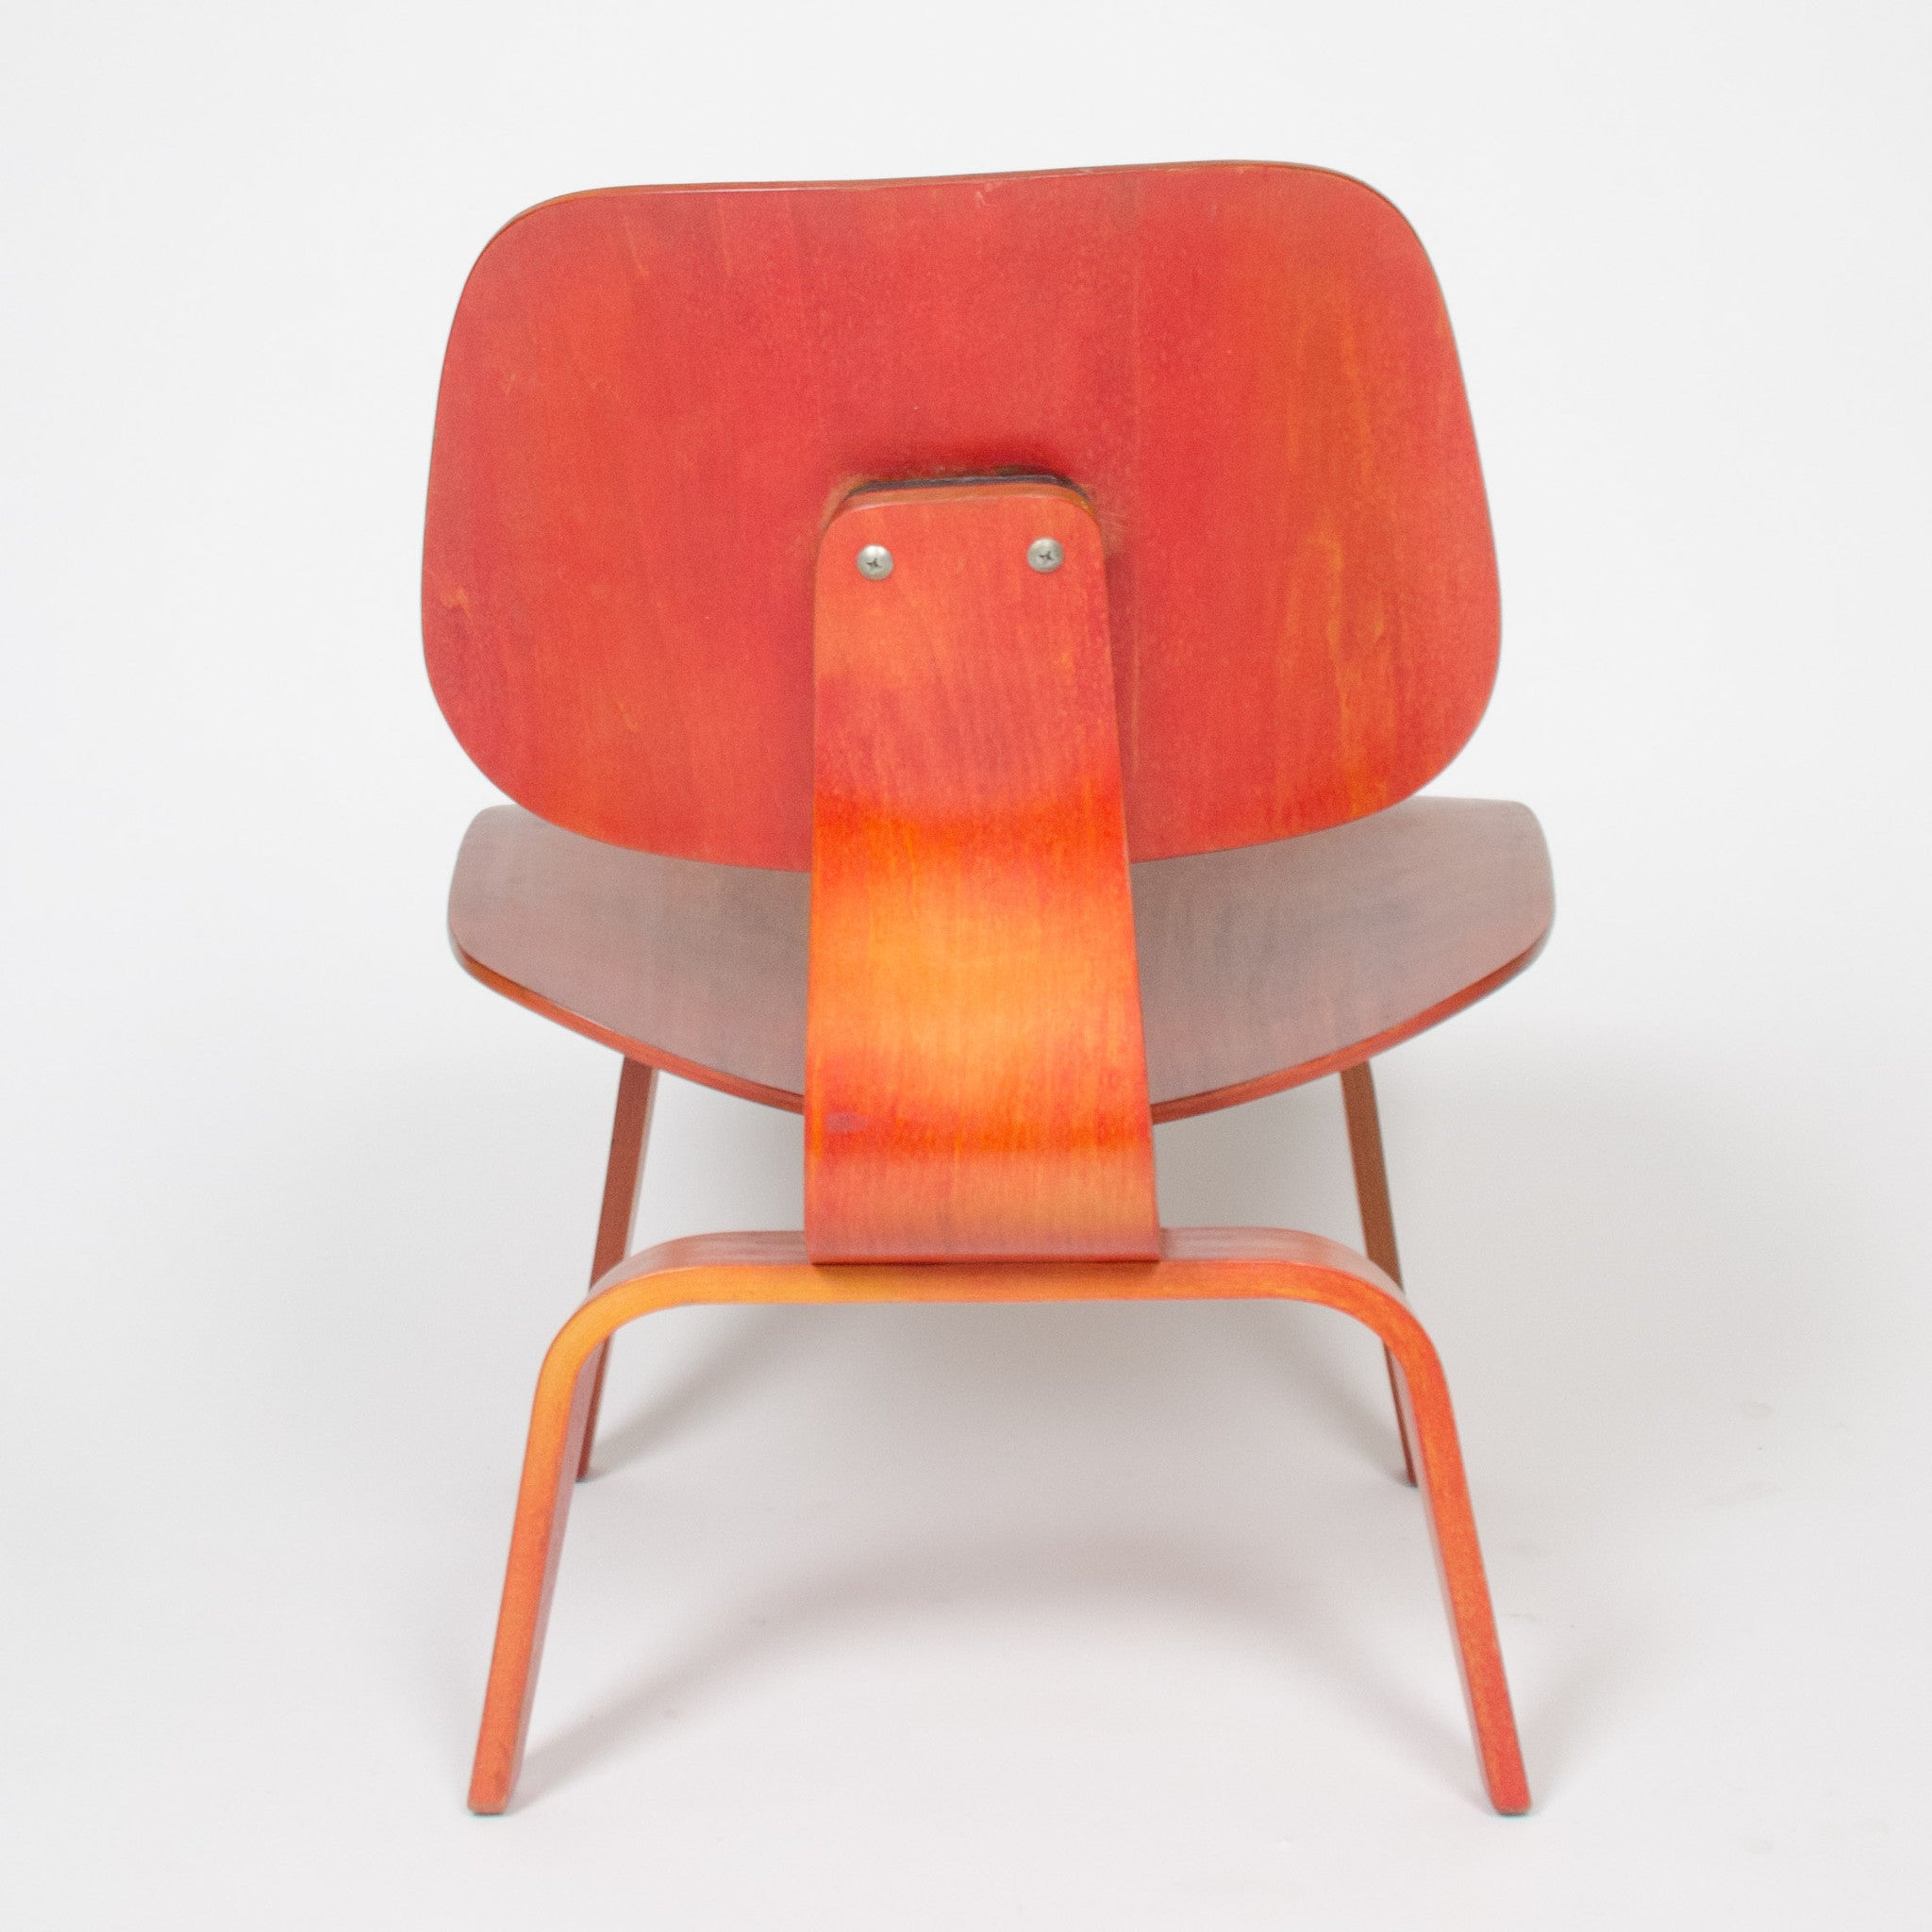 SOLD Eames Herman Miller 1950 LCW Early Red Aniline, All Original Lounge Chair